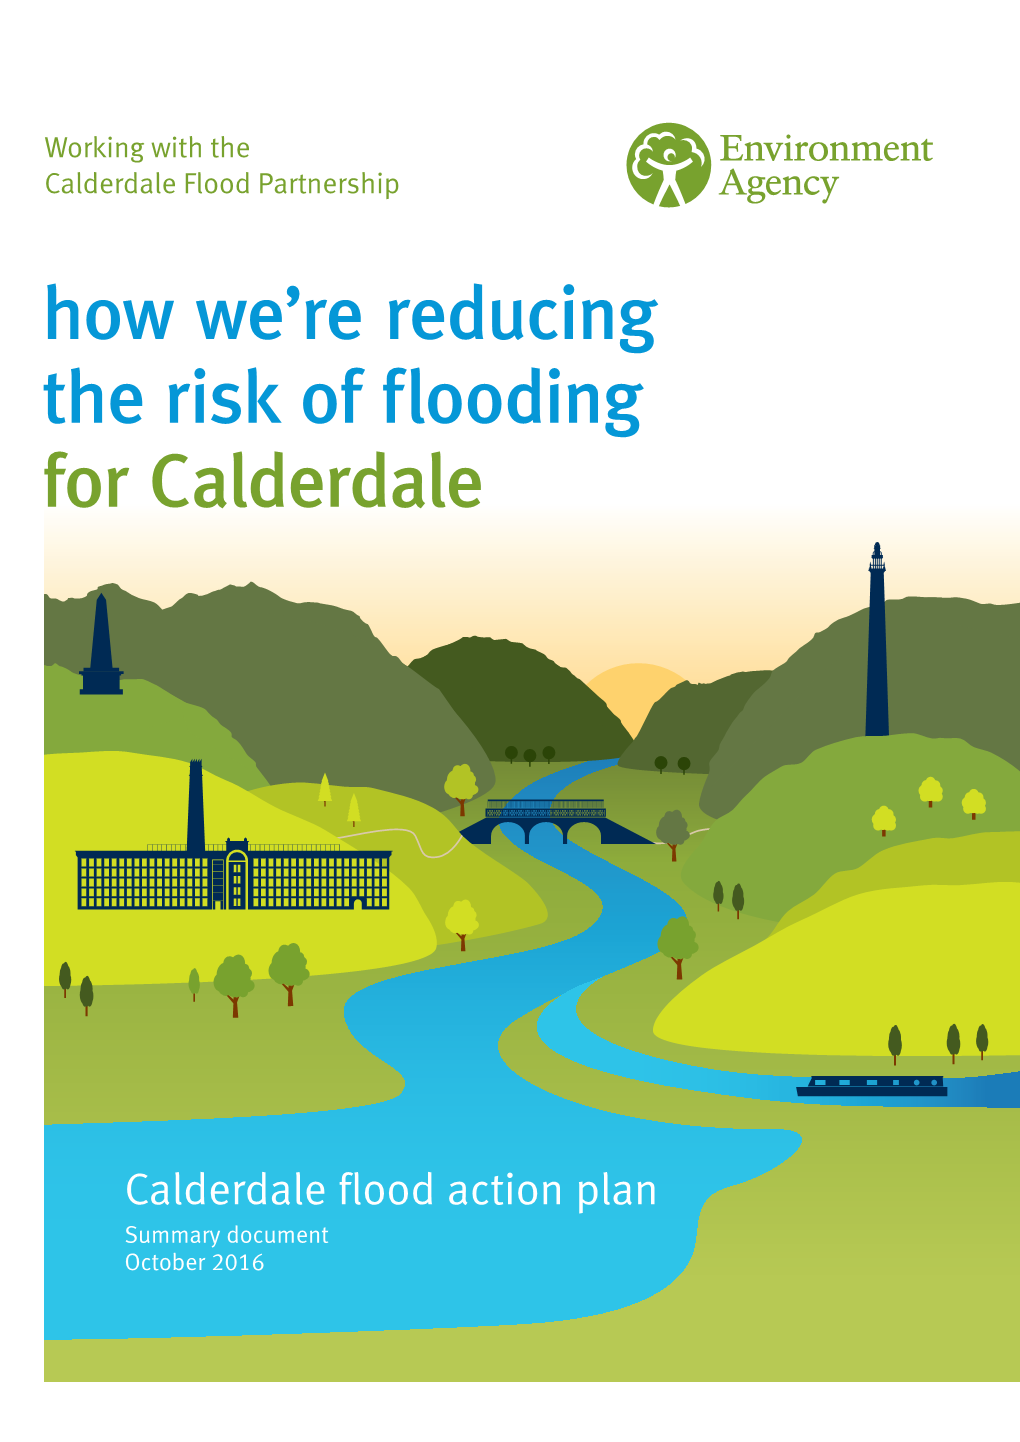 How We're Reducing the Risk of Flooding for Calderdale